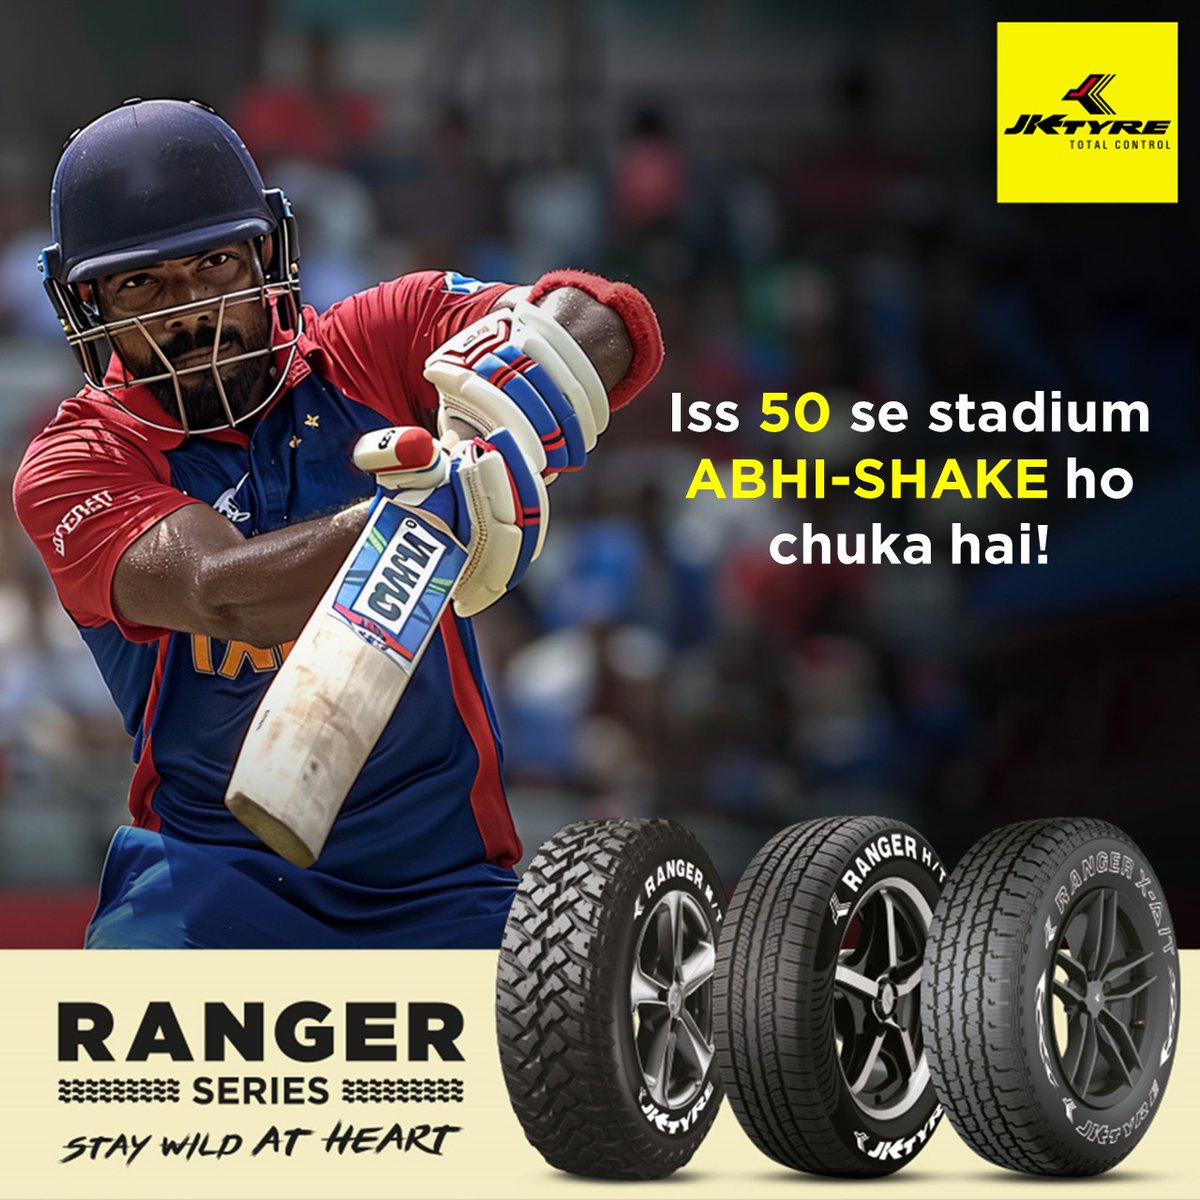 That 50 was truly wild, just like a ride with our Ranger series tyre.

Check out the #RangerSeries from JK Tyre, built for adventures, and multiple terrains, for those who are ‘Wild at Heart’.

#JKTyre #IndianT20League #Rajasthan #Delhi